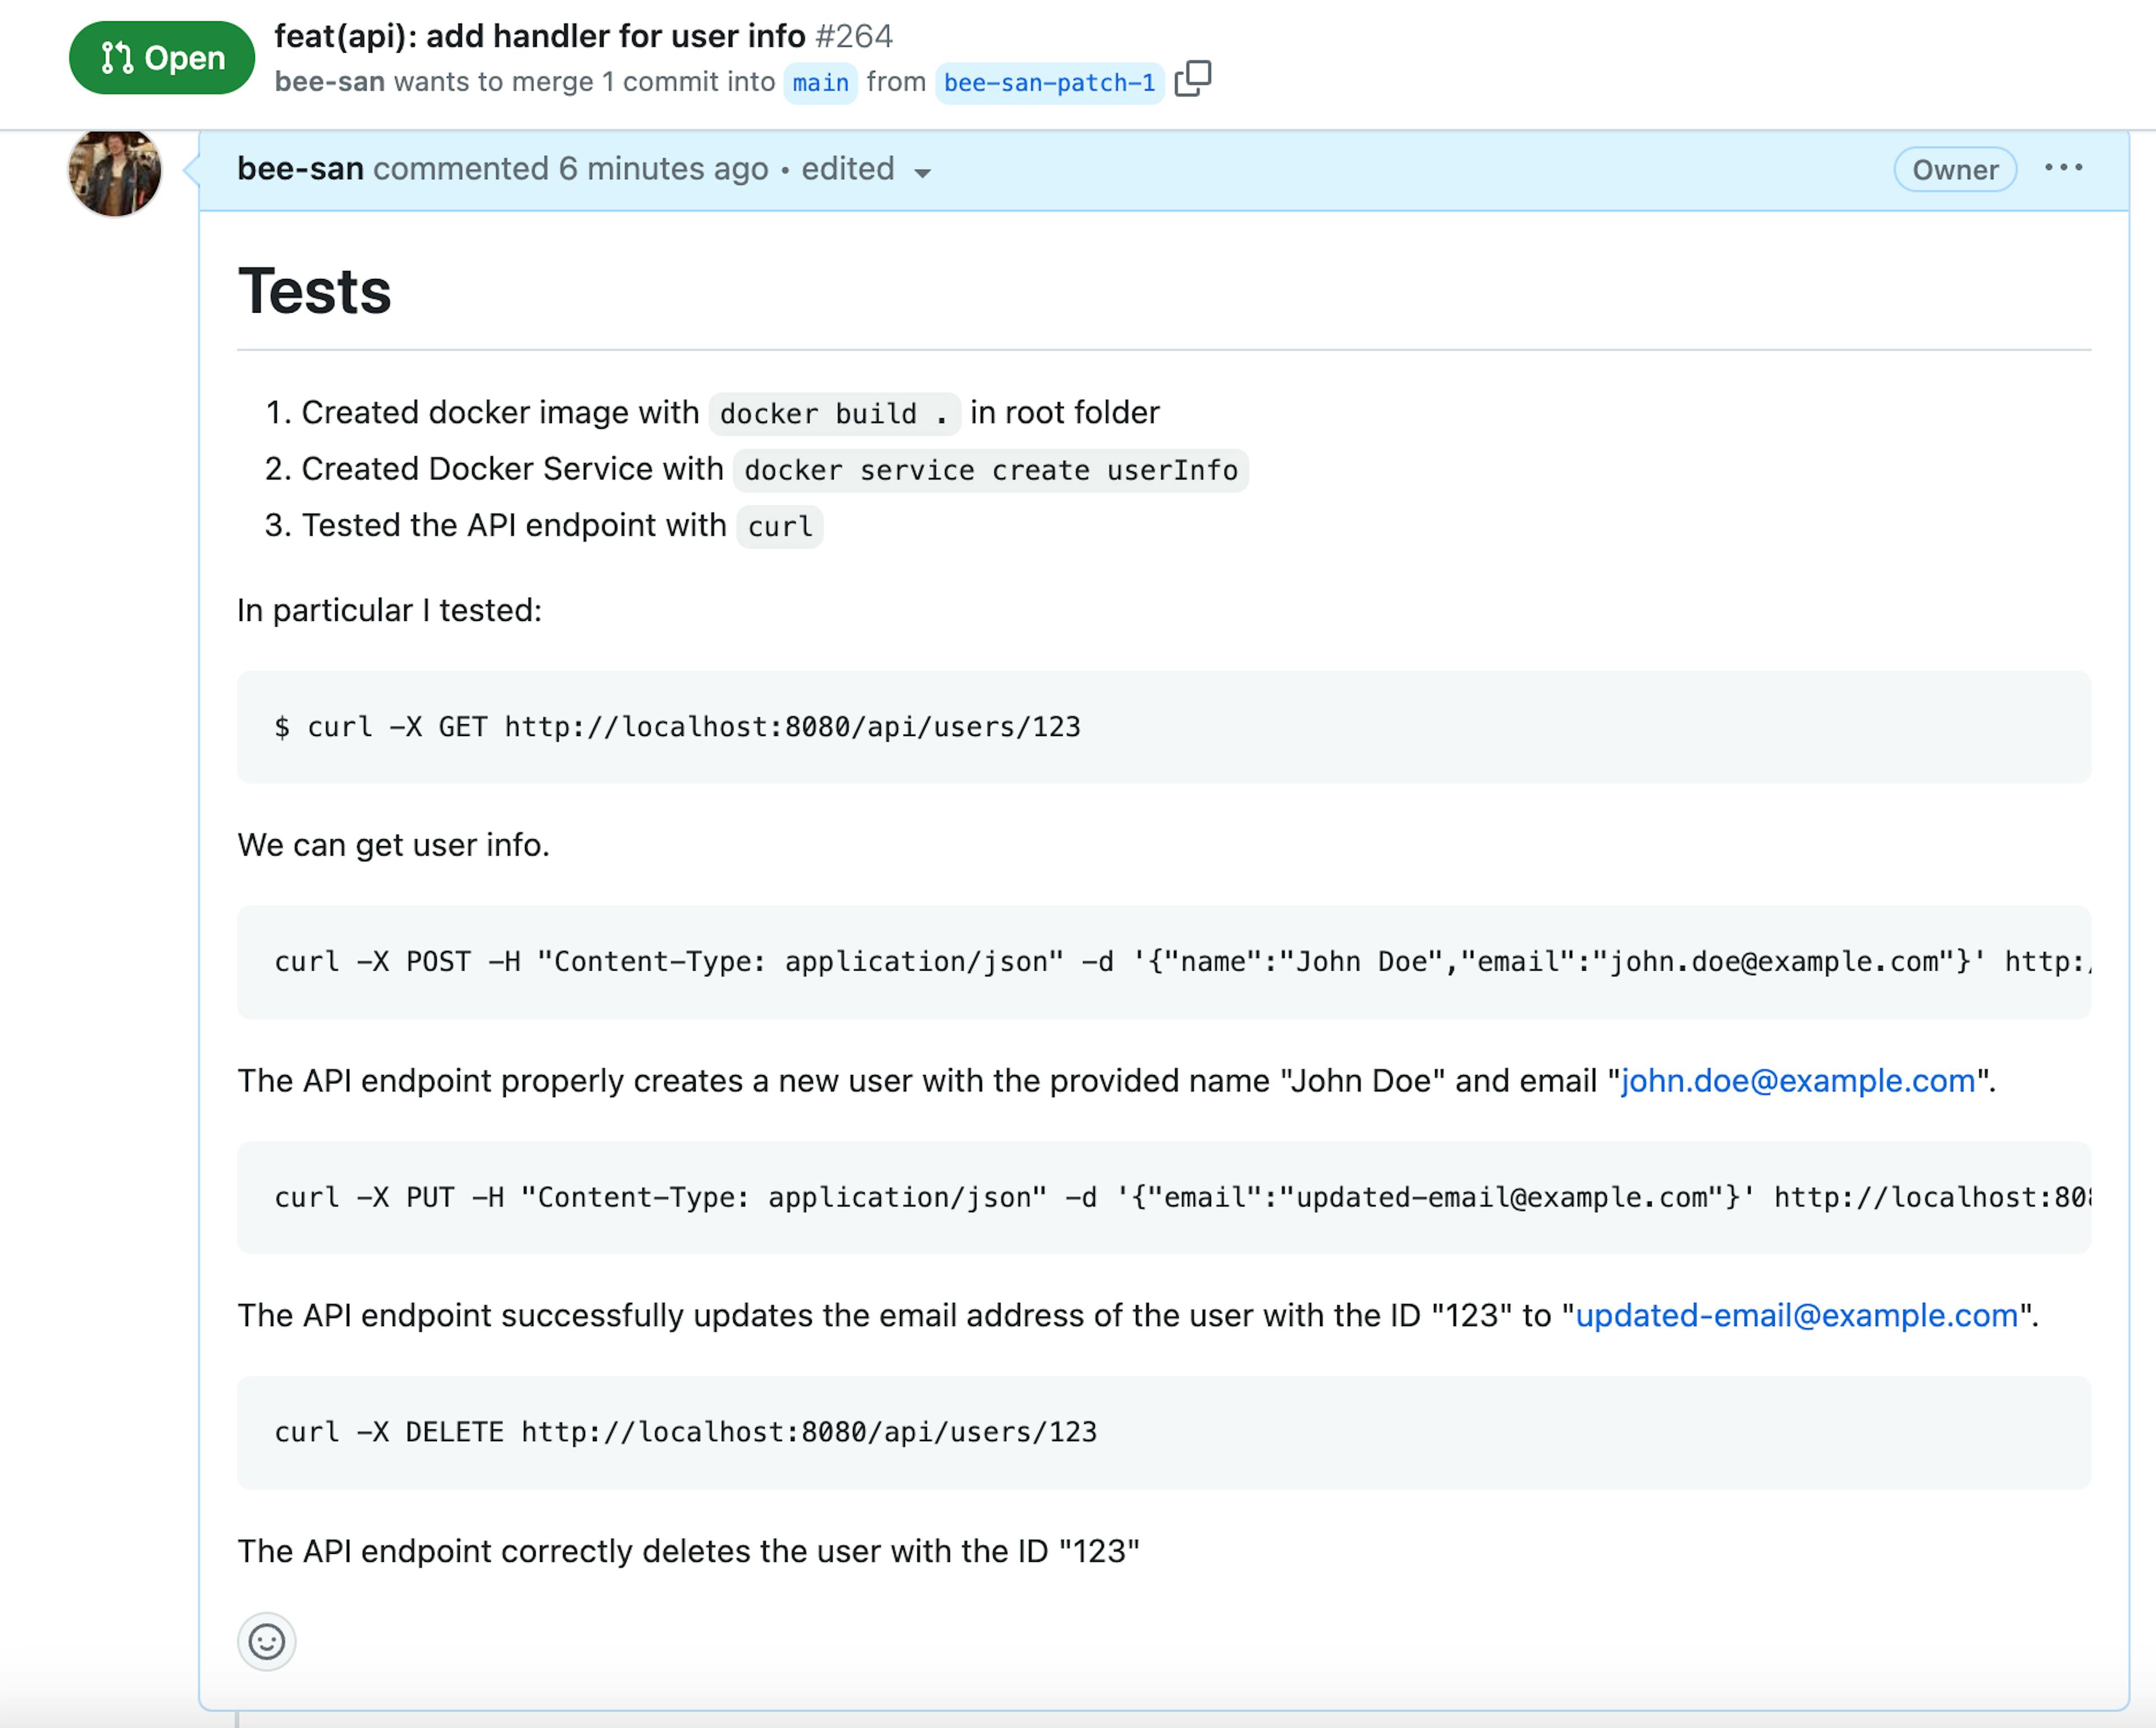 Example pull request detailling a tests header with instructions on how to set up the testing environment along with curl commands that show exactly how to test the API endpoint